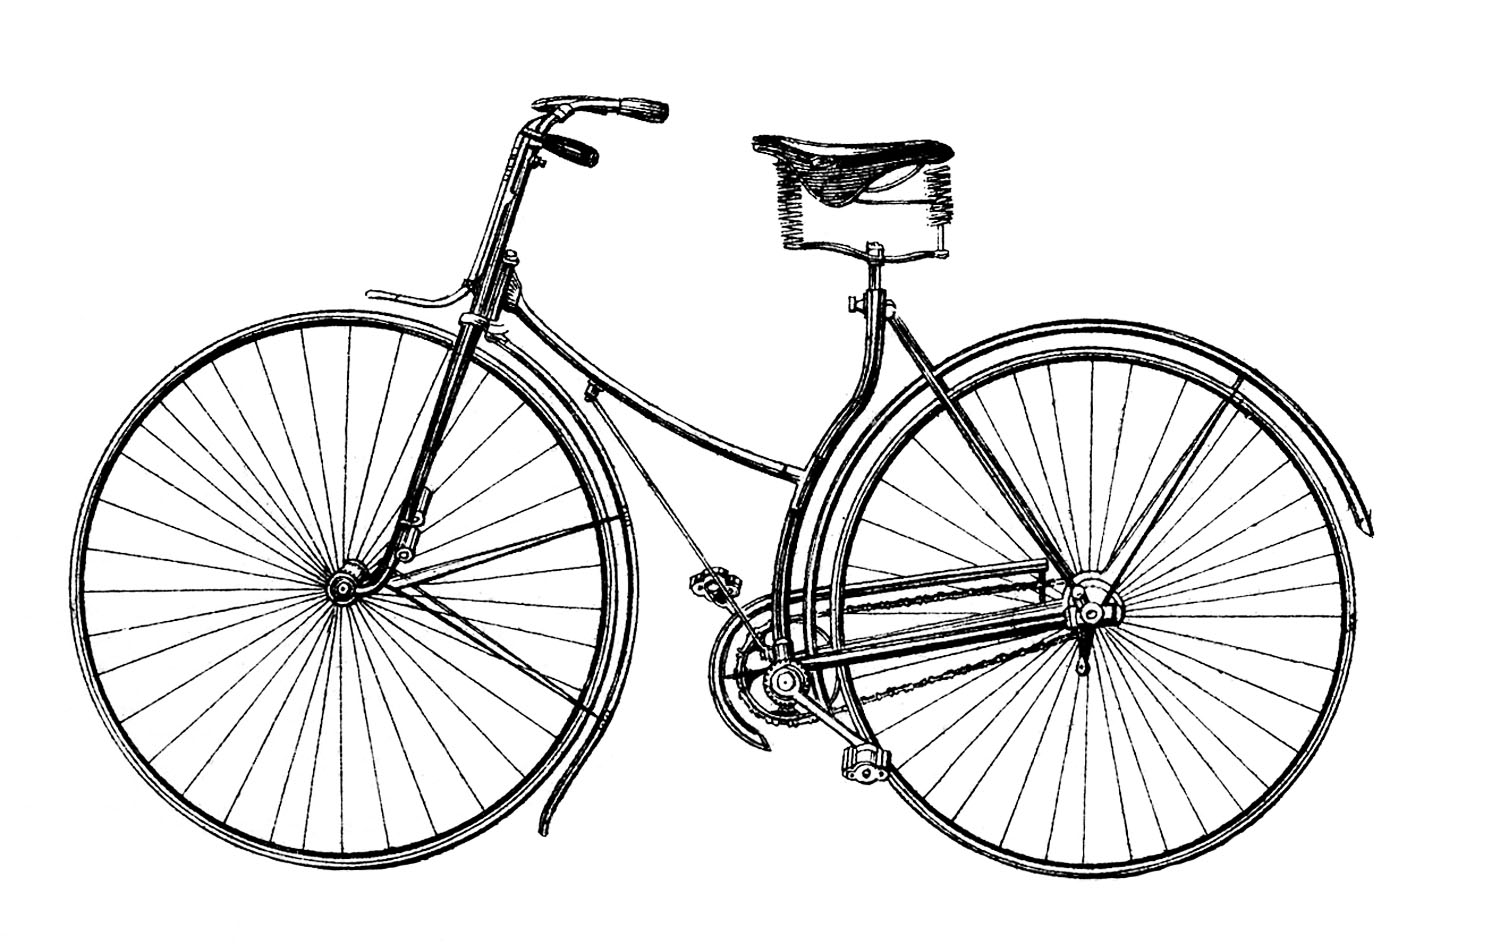 Free Vector Downloads - Vintage Bicycle - The Graphics Fairy ...